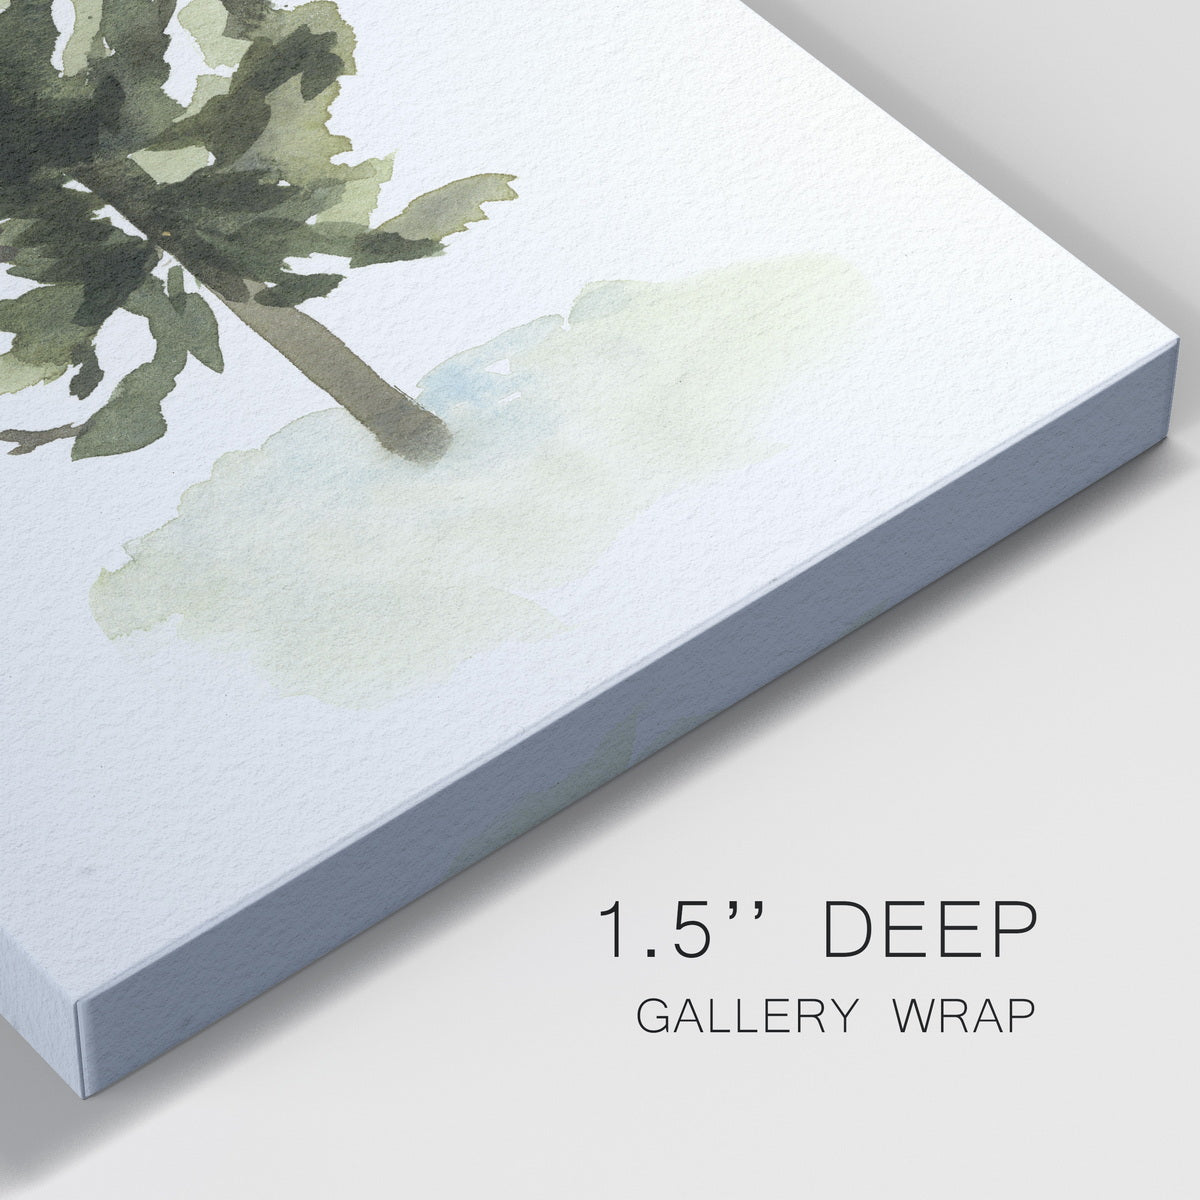 Watercolor Pine I Premium Gallery Wrapped Canvas - Ready to Hang